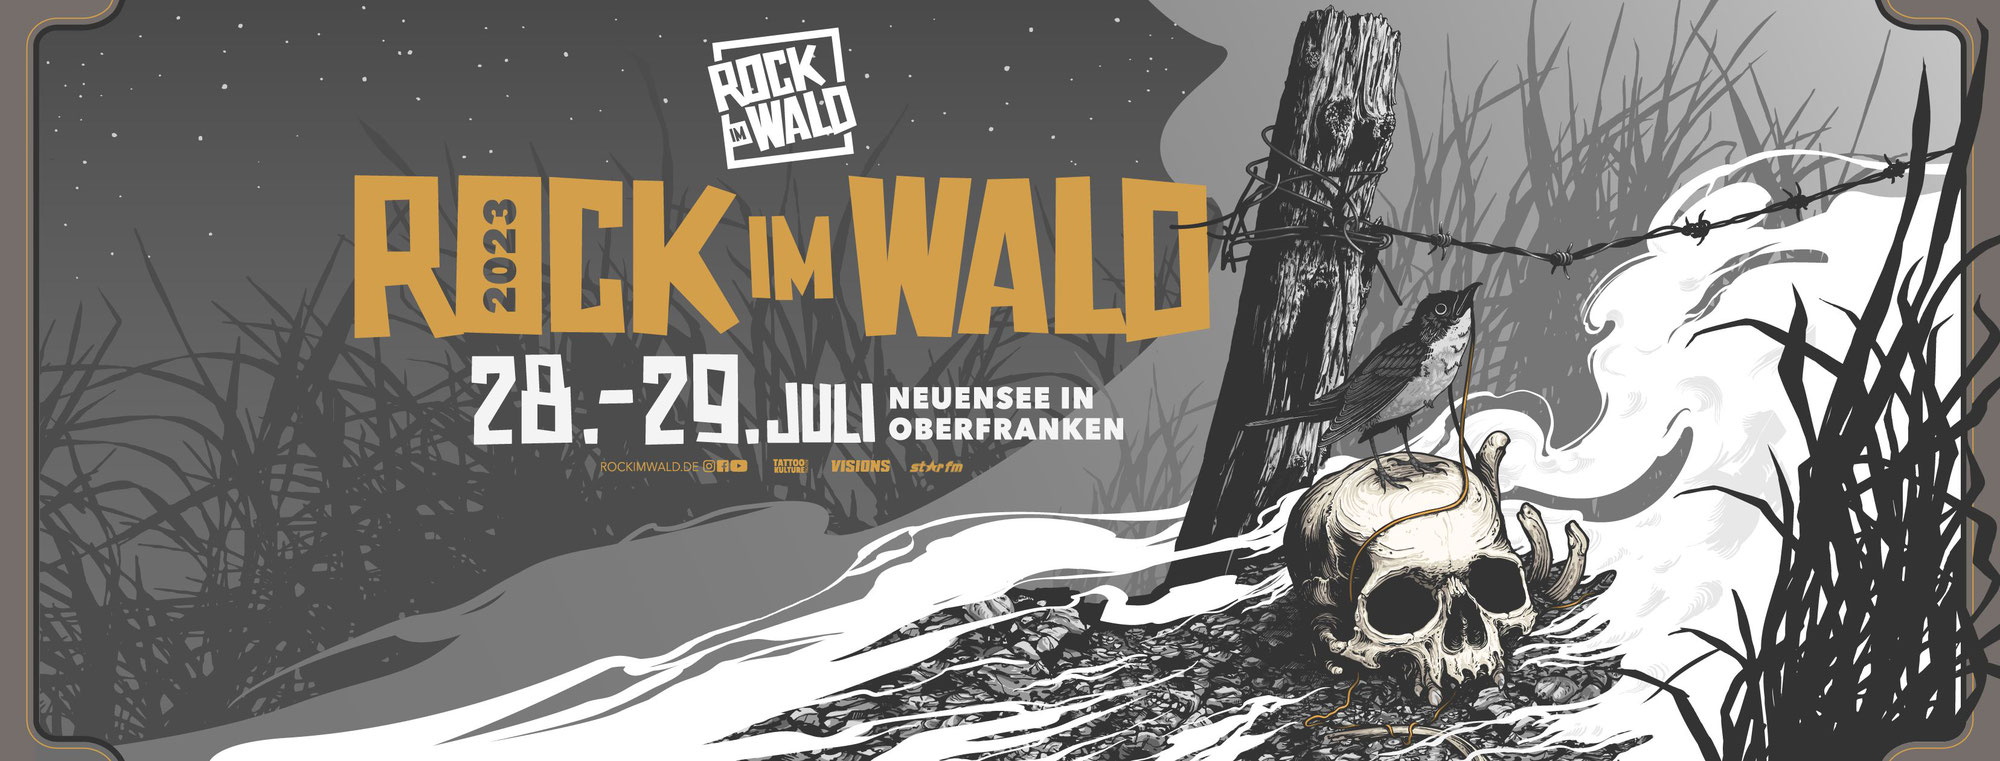 Rock im Wald´s line-up is getting more and more complete